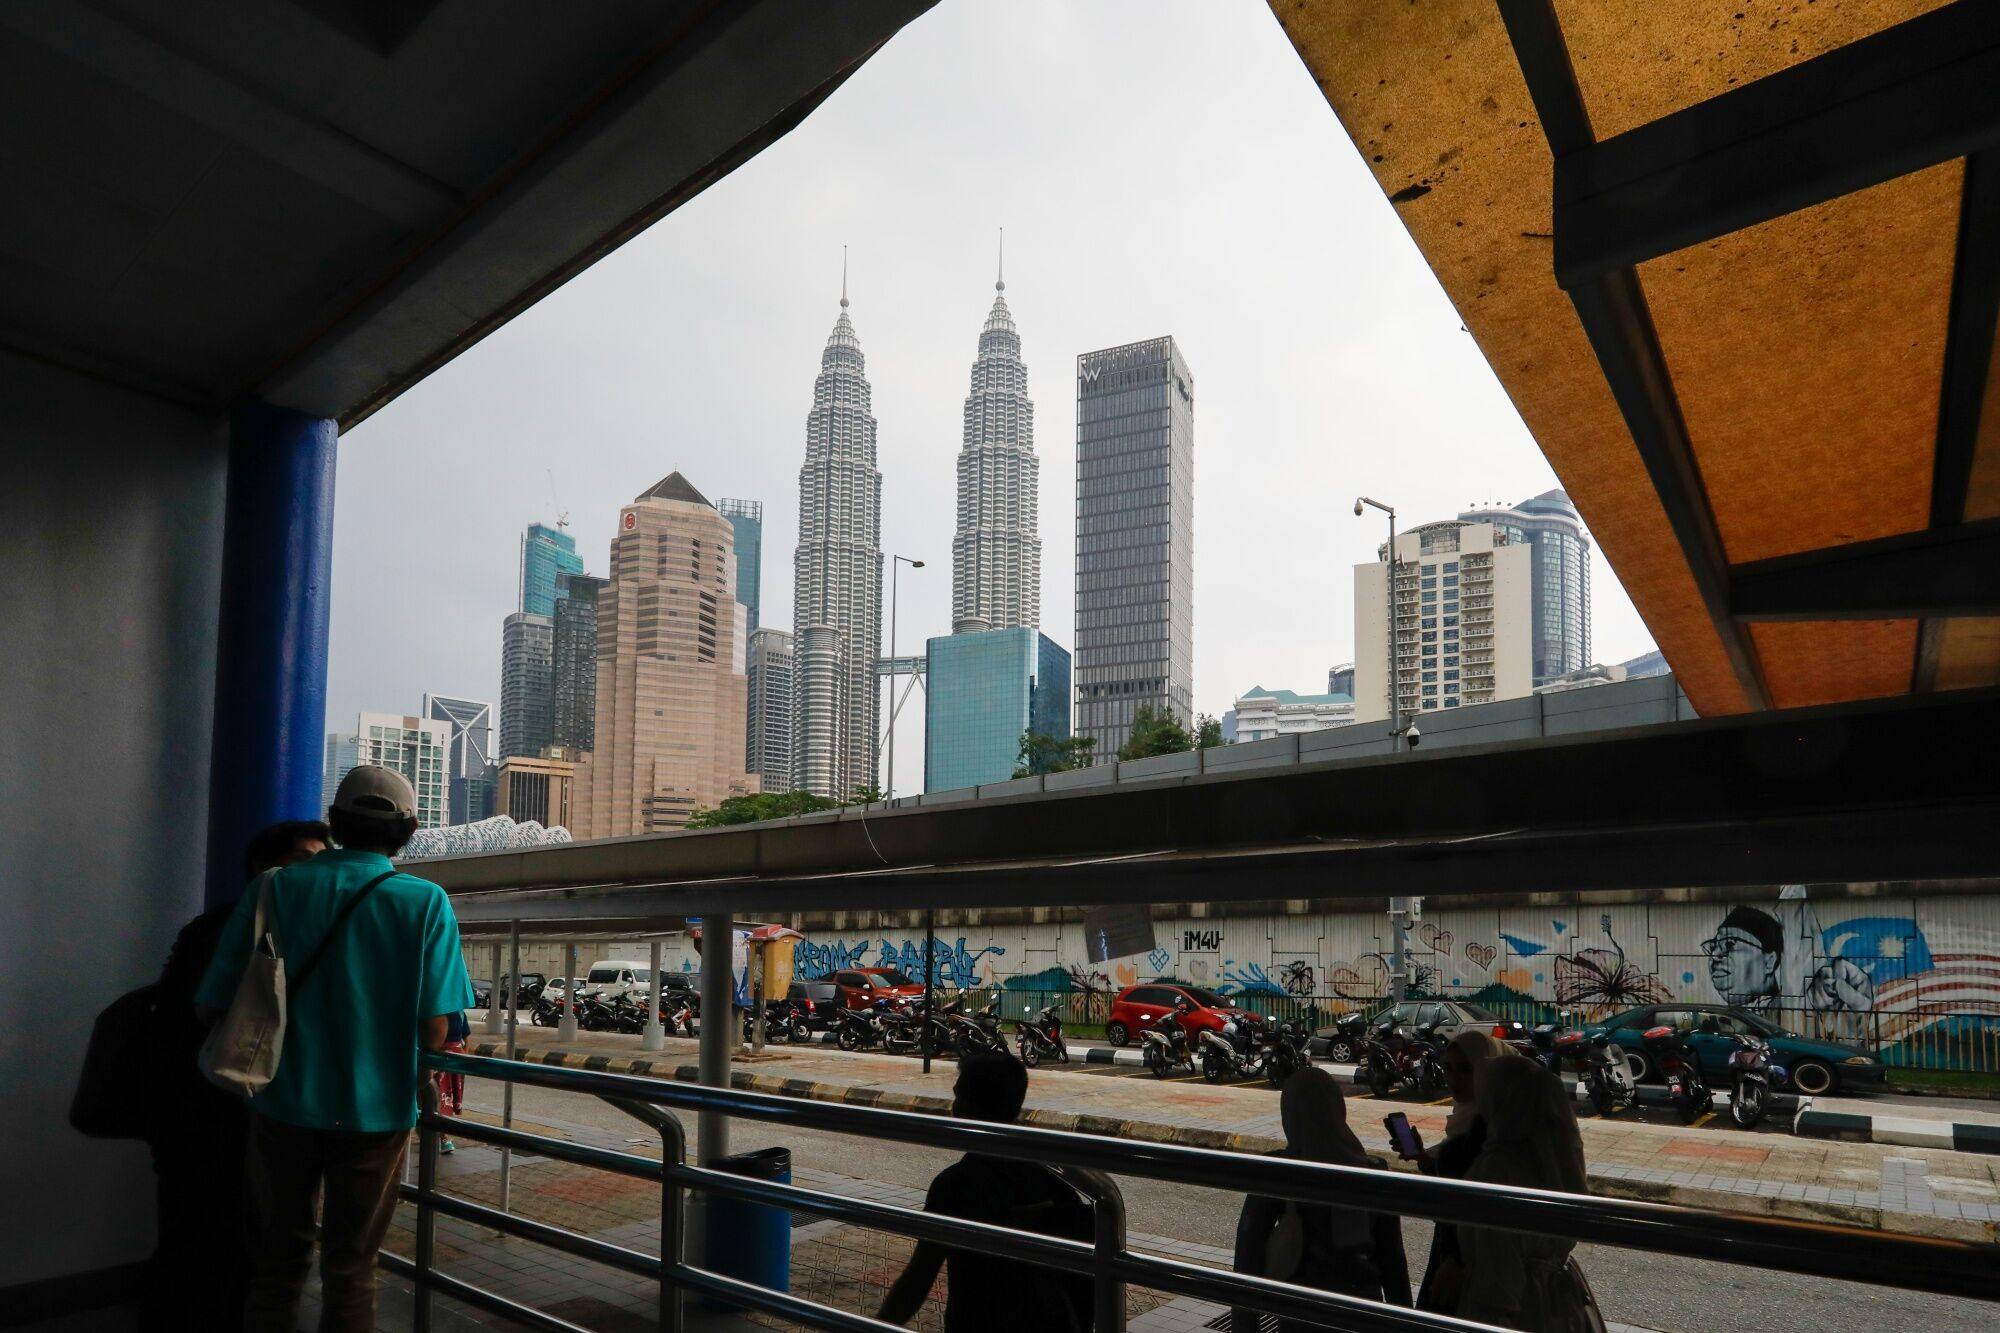 Malaysia’s Petronas Twin Towers. Sex education remains taboo in Malaysian schools despite repeated calls to expand the topic beyond basic biology. Photo: Bloomberg